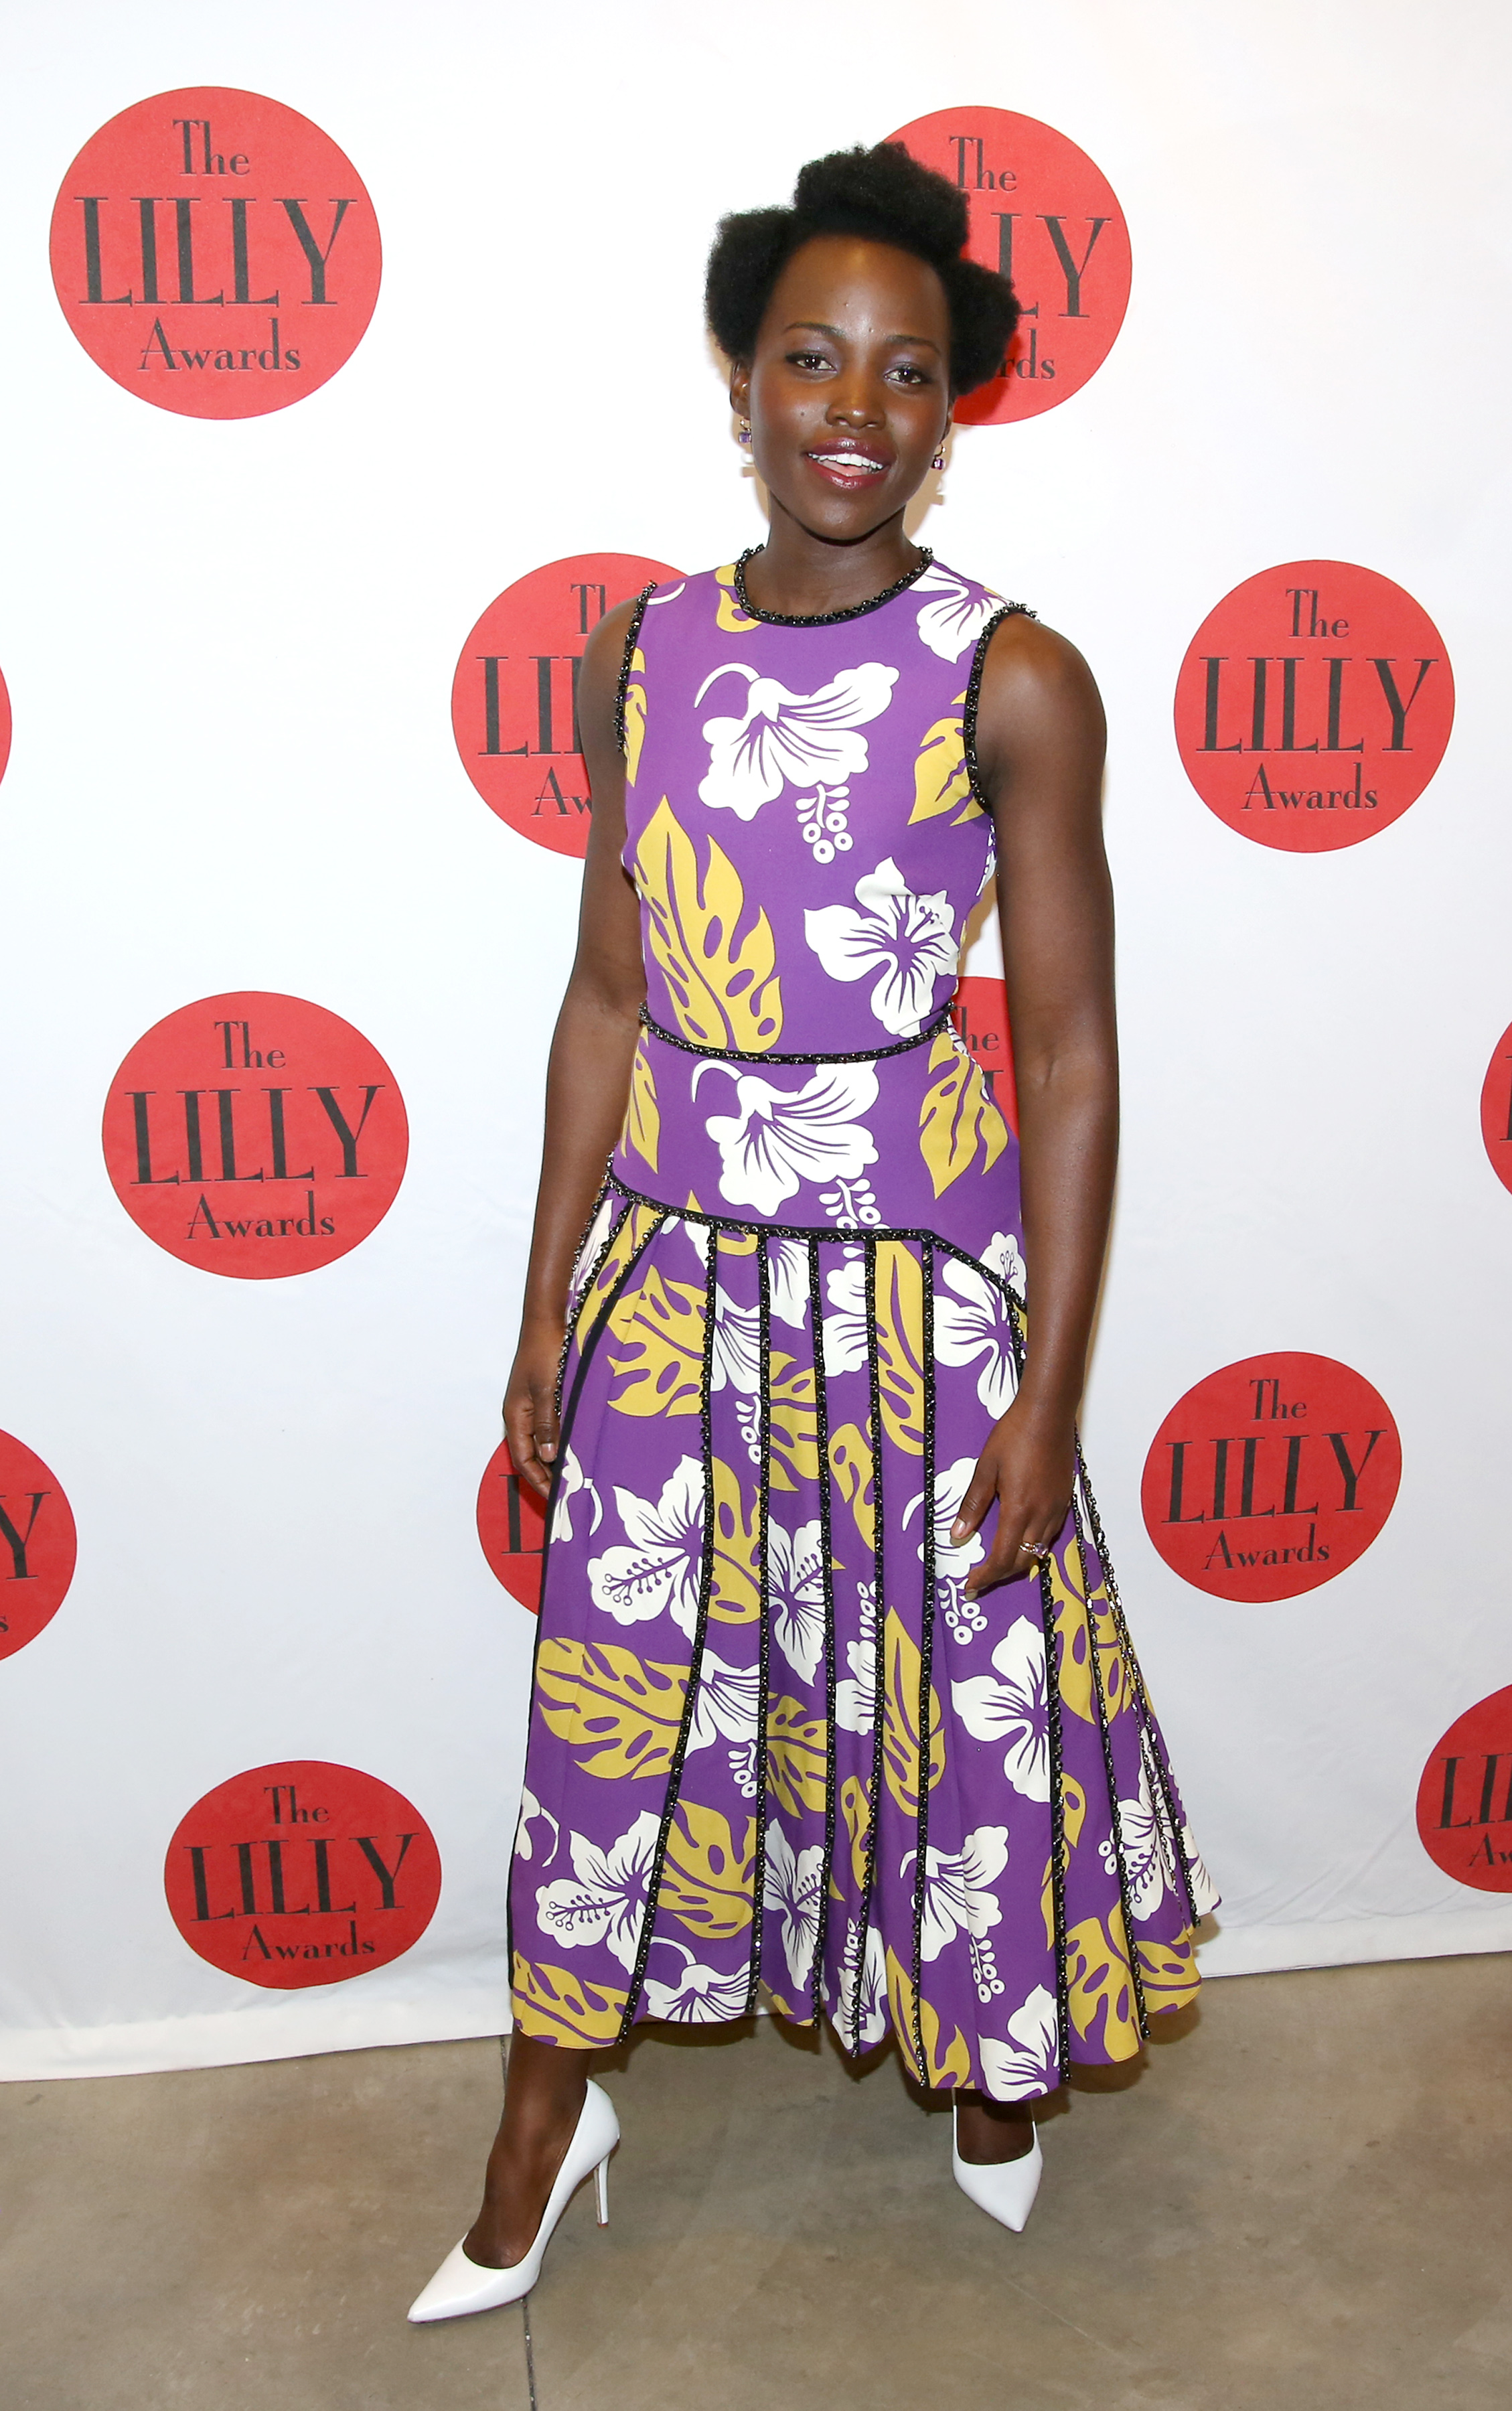 7th Annual Lilly Awards